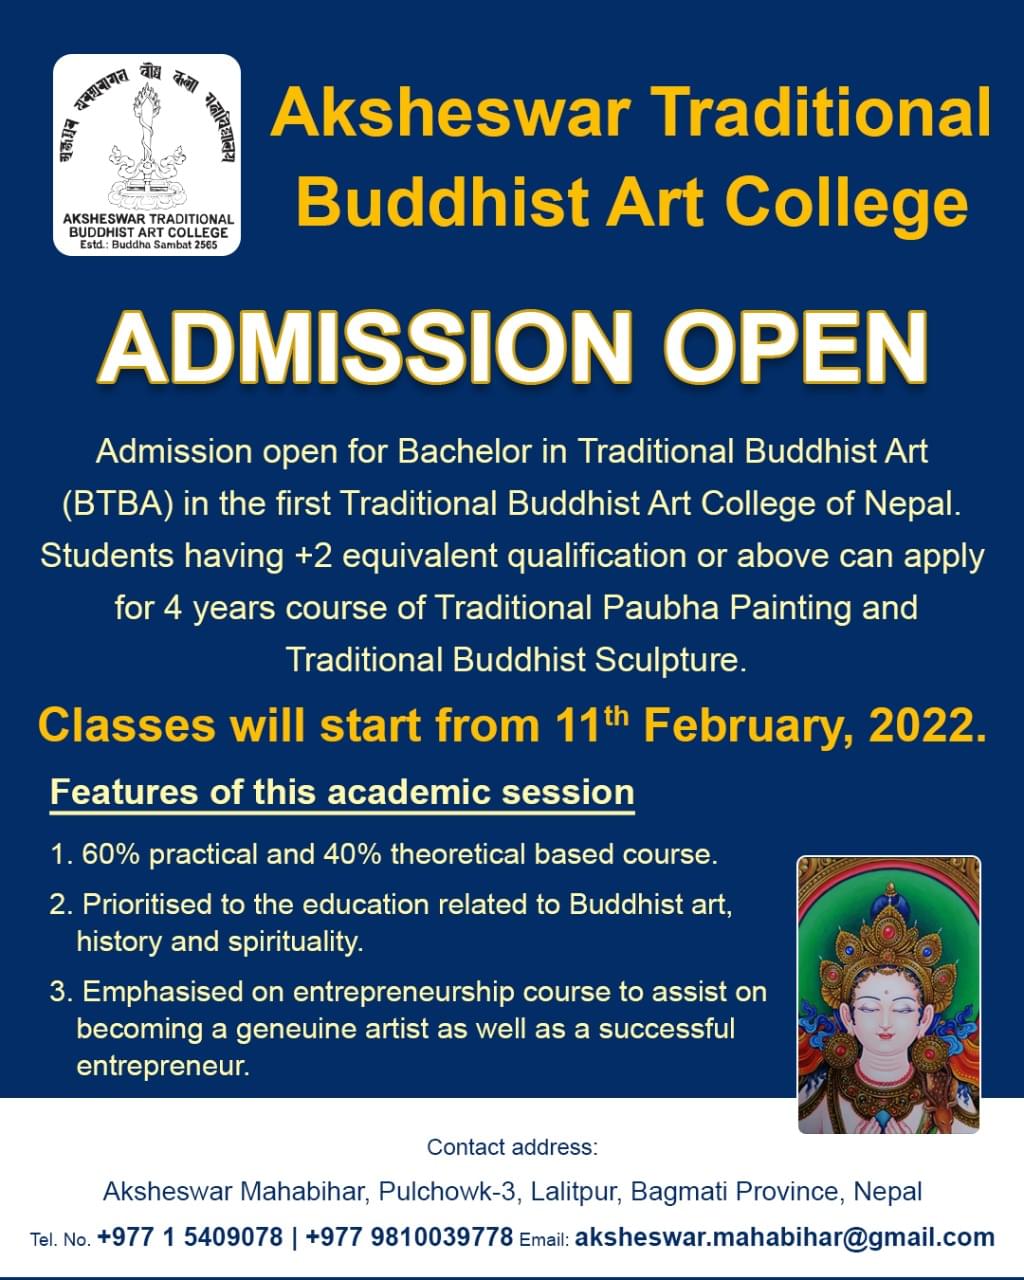 Admission open for BTBA